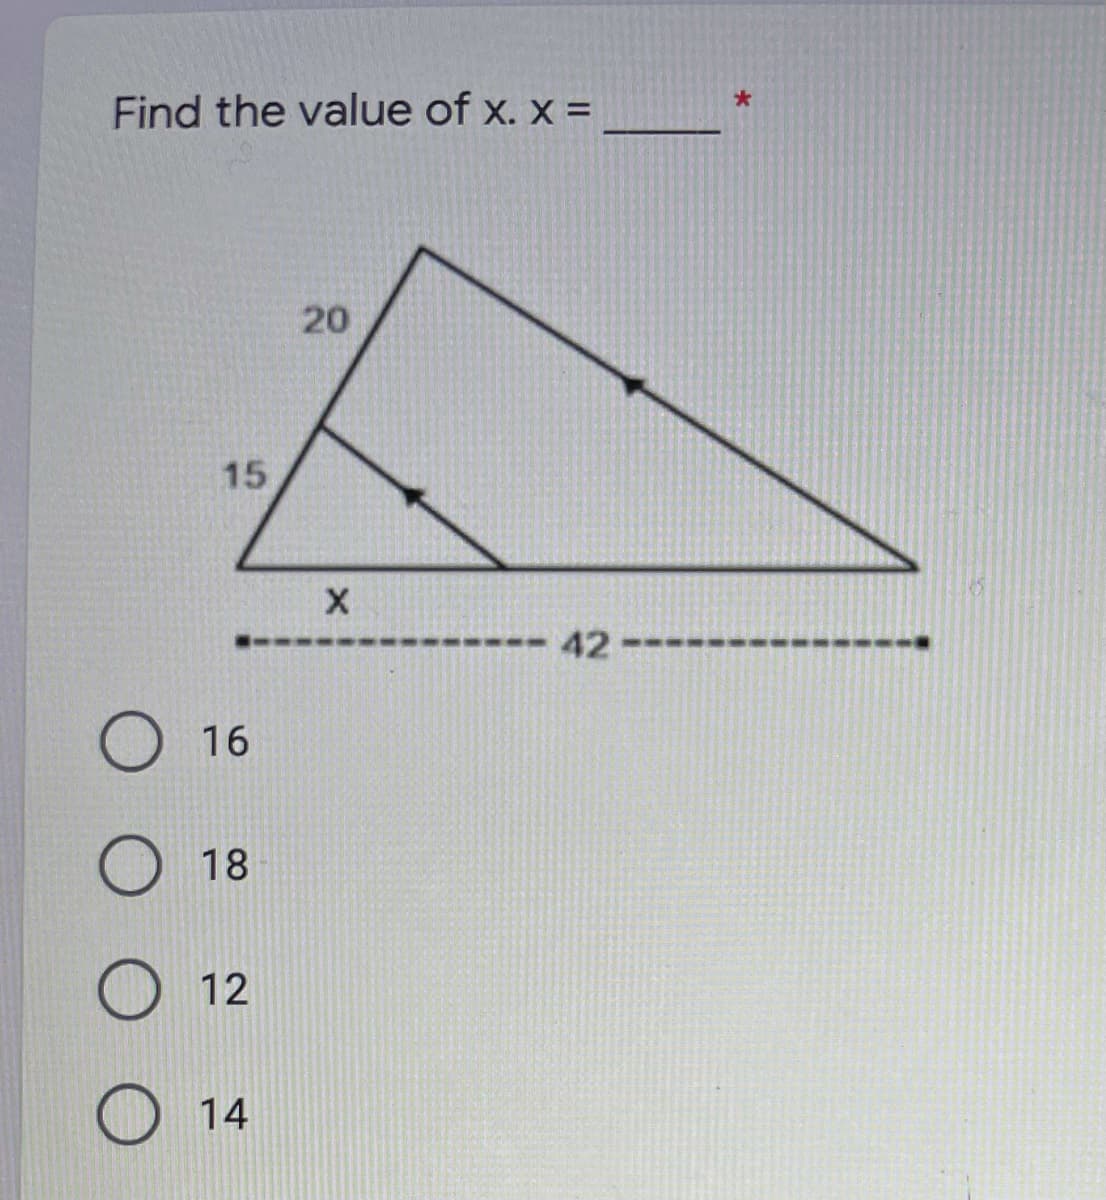 Find the value of x. x =
20
15
42
16
18
12
14
